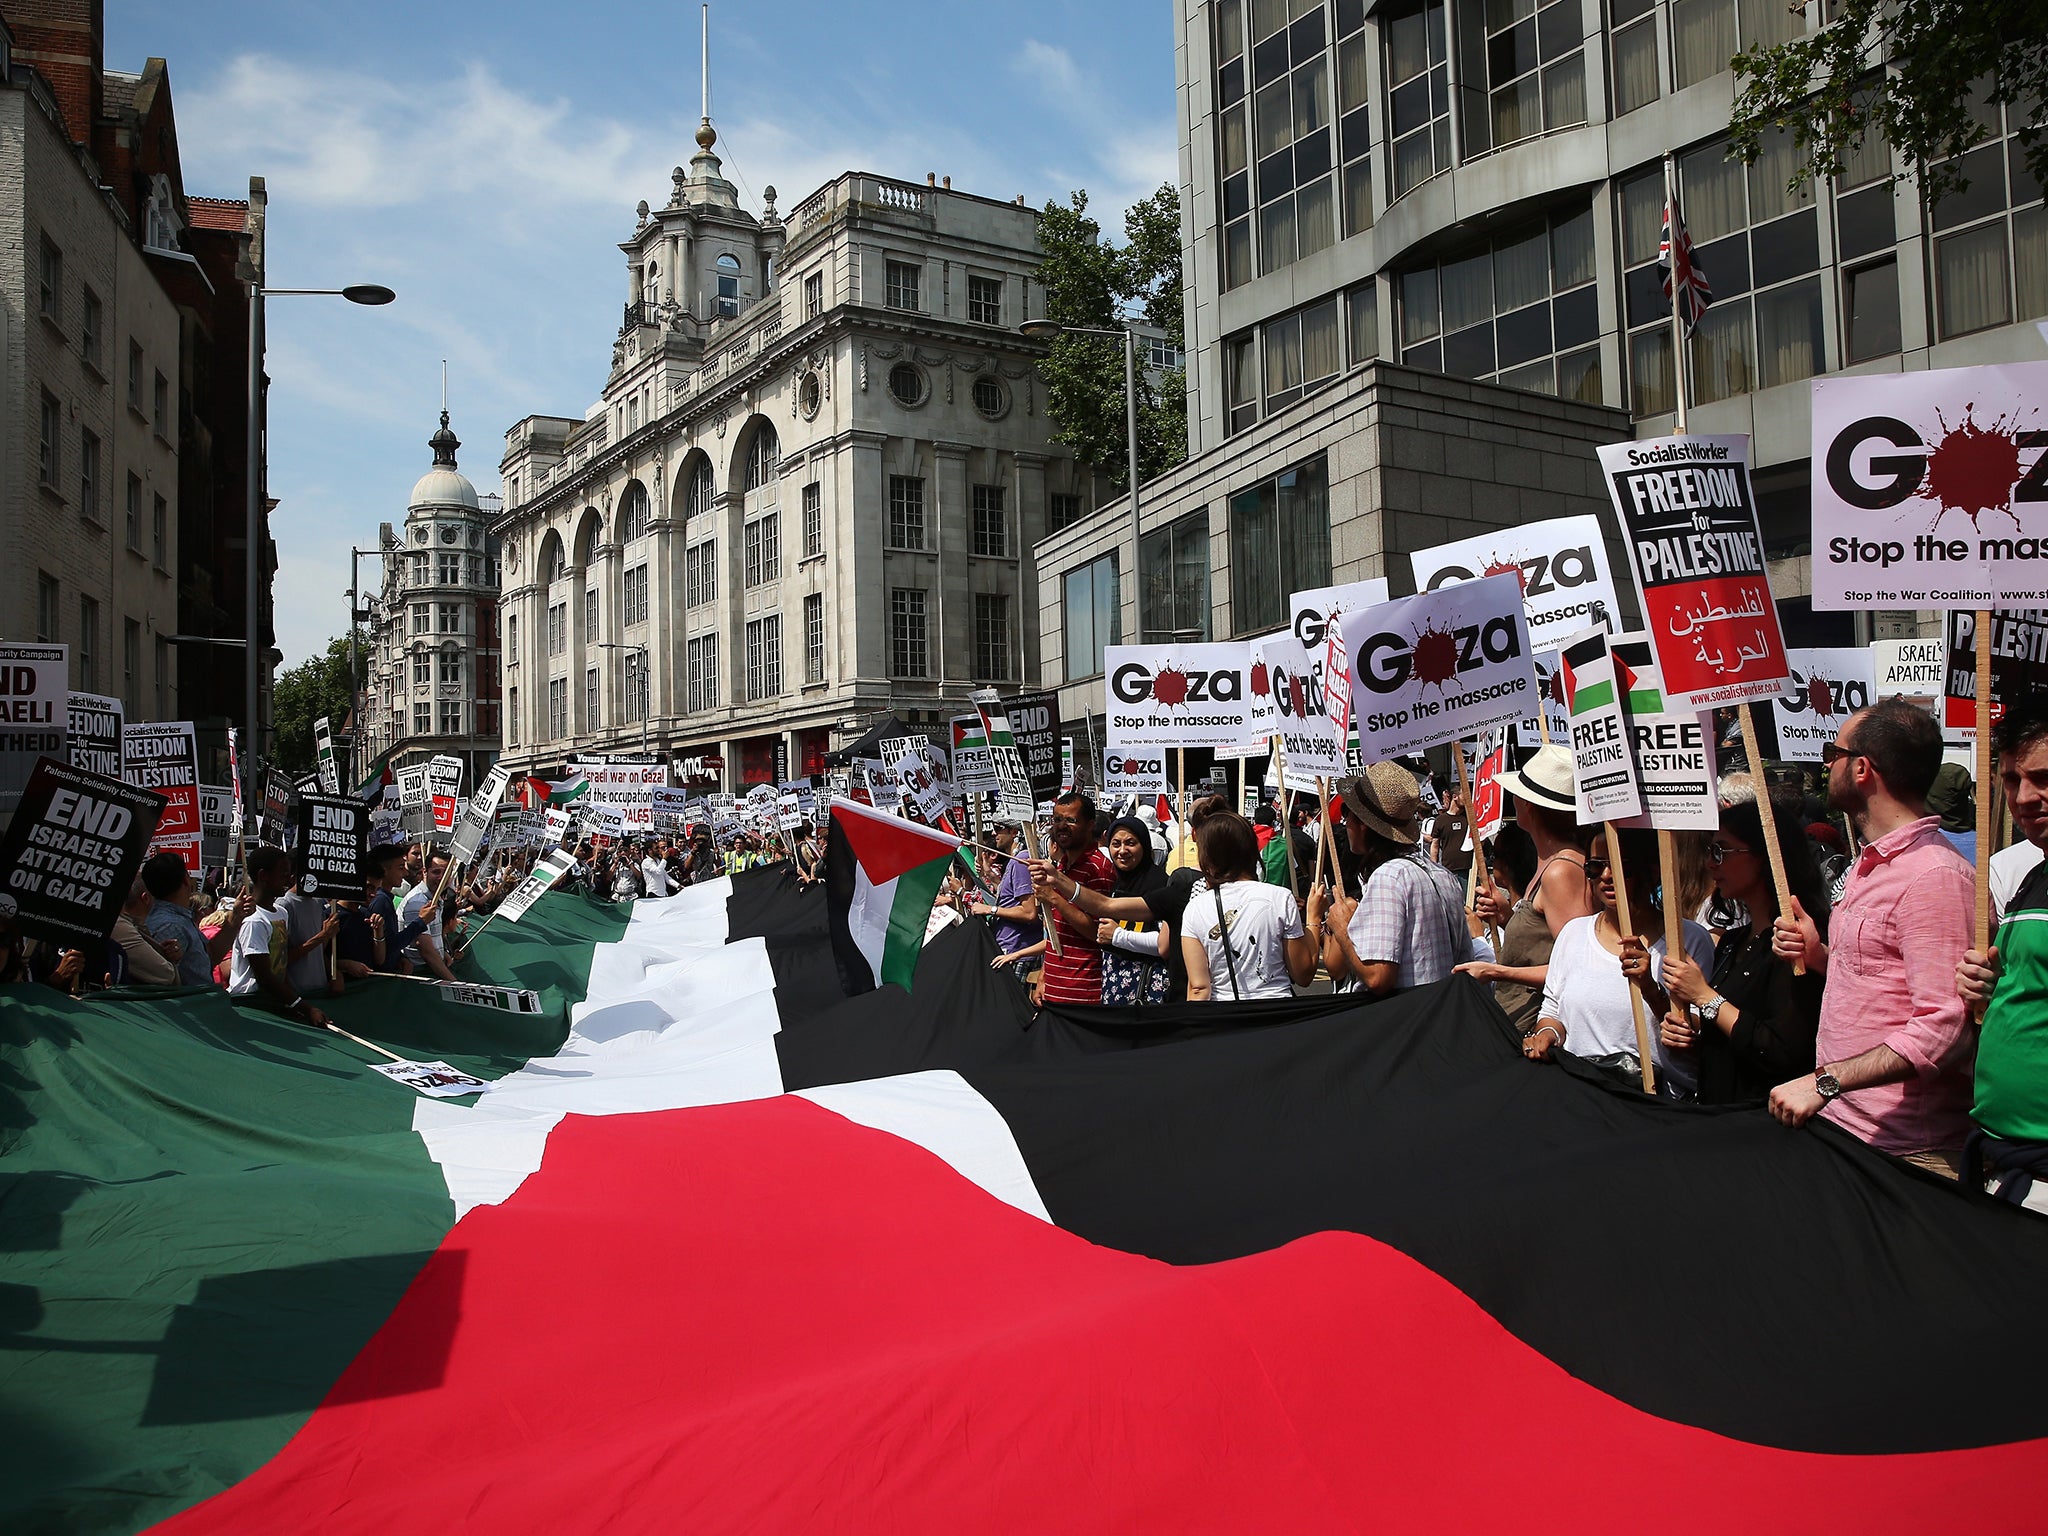 Protesters waving the Palestinian flag during a march
against the bombing of Gaza in London in July